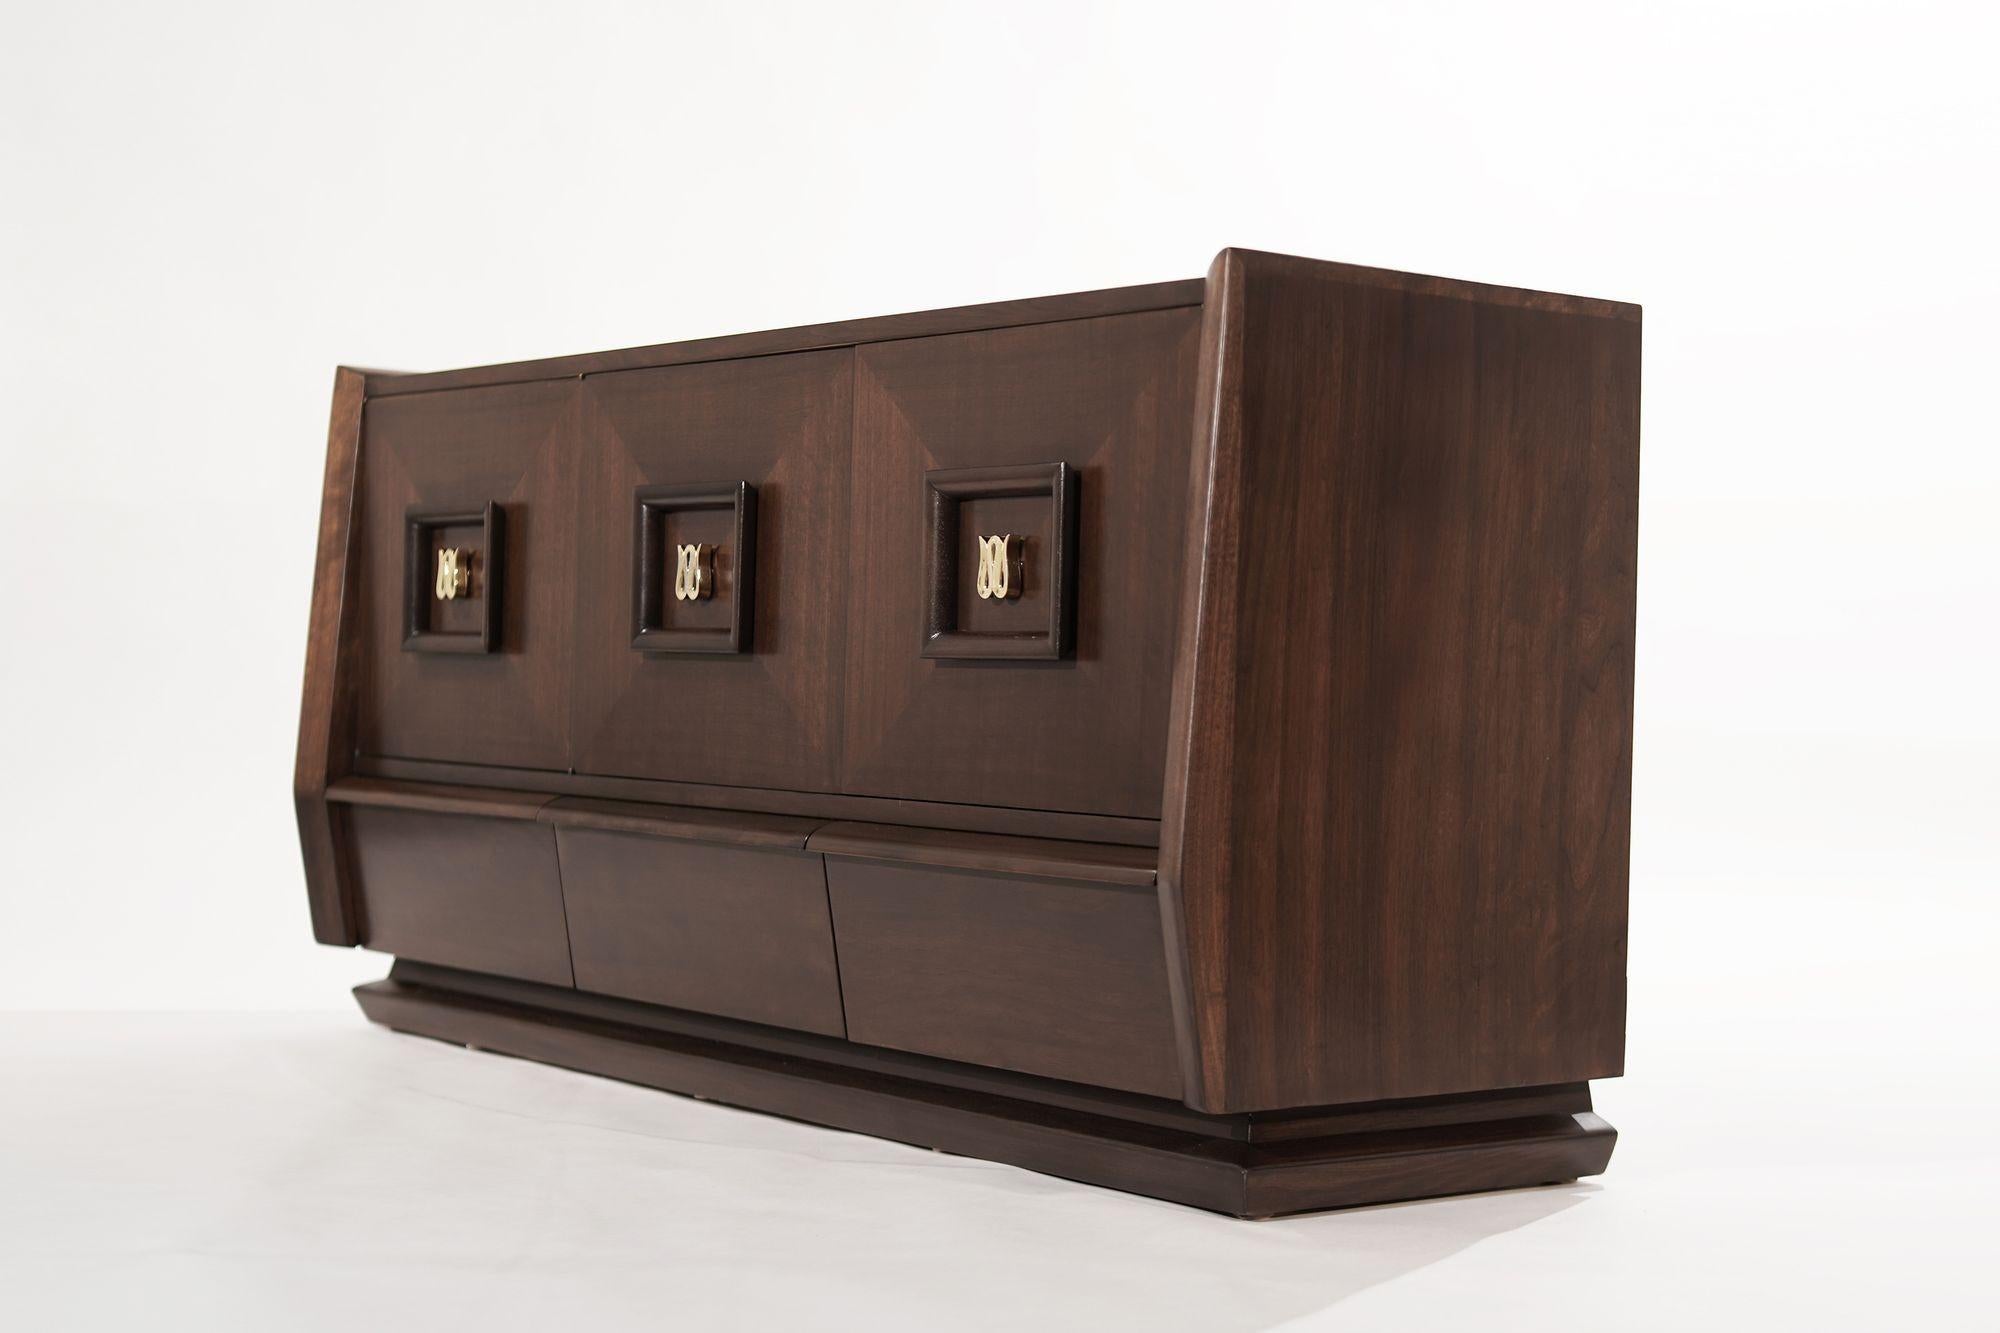 A walnut dresser original from Italy, circa 1950-1959. Featuring swooping curves and sudden edges, the three doors open up to reveal 6 large drawers with an additional 3 drawers underneath providing ample storage space. Hand-polished brass 